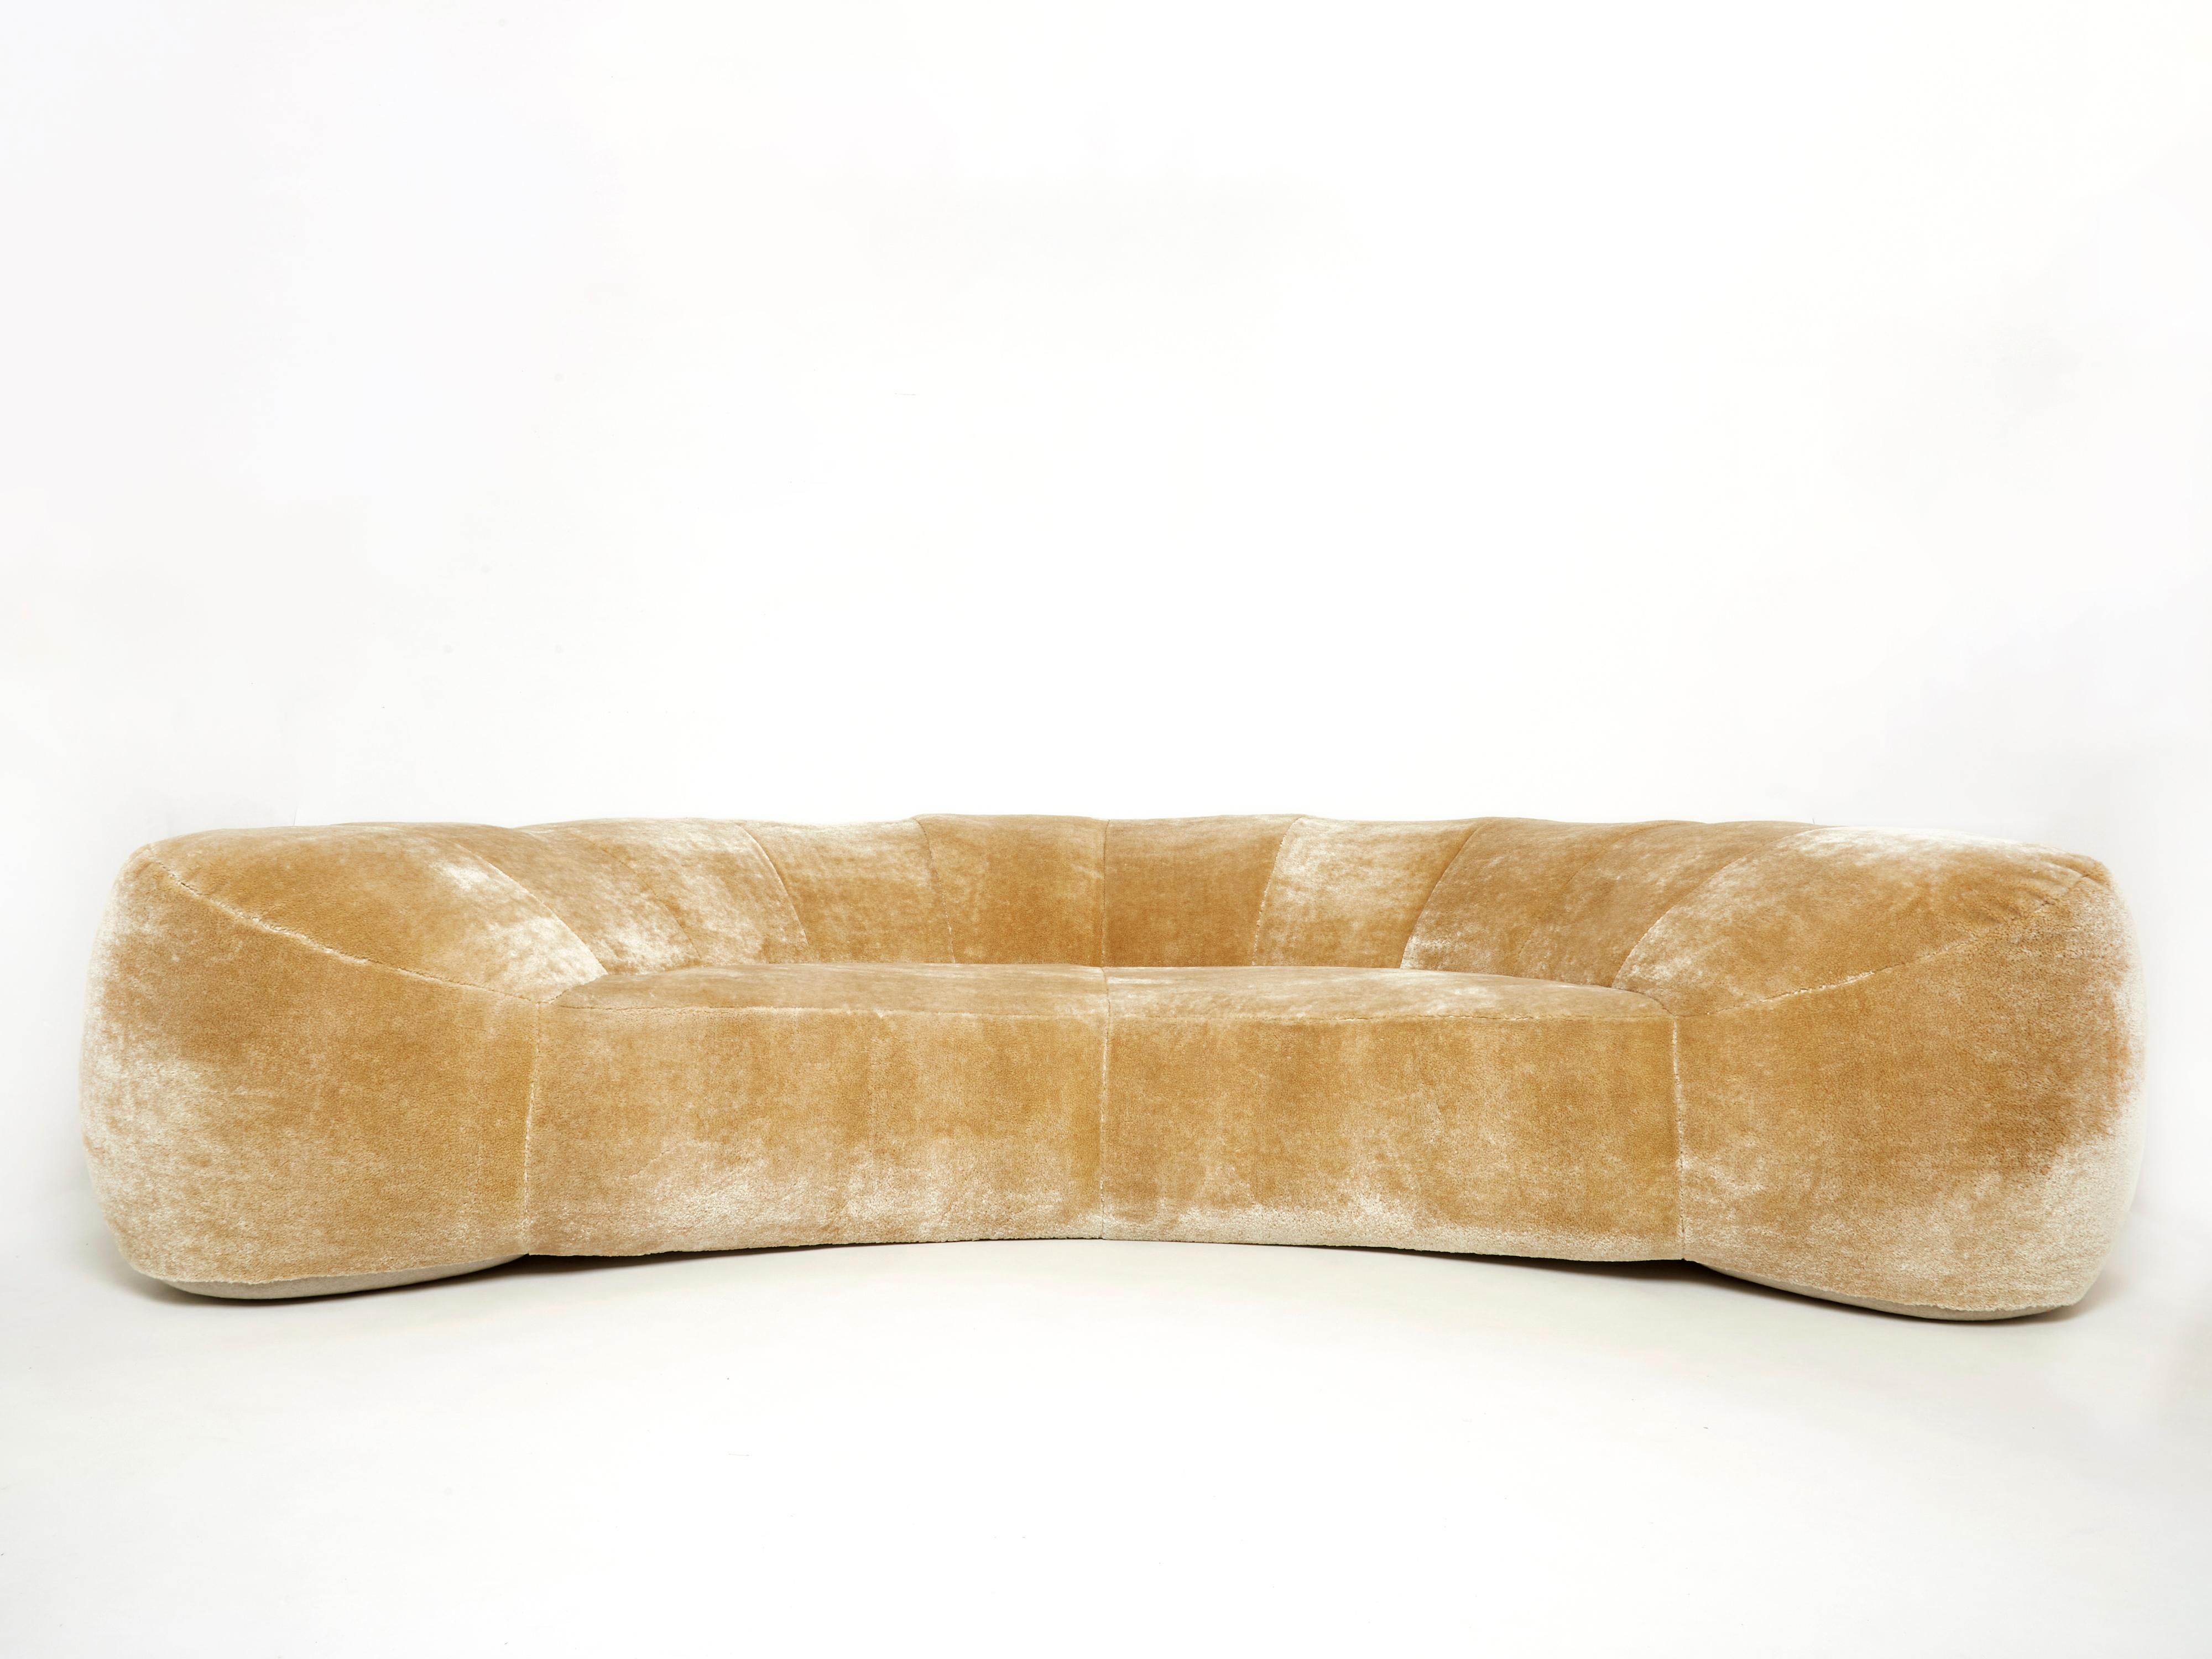 Rare croissant sofa by Raphaël Raffel for Maison Honoré Paris made in the mid 1970s. The sofa has been fully restored and newly upholstered with a beautiful light Teddy caramel mohair velvet fabric from Italian editor Dedar - A Soft Place reference,